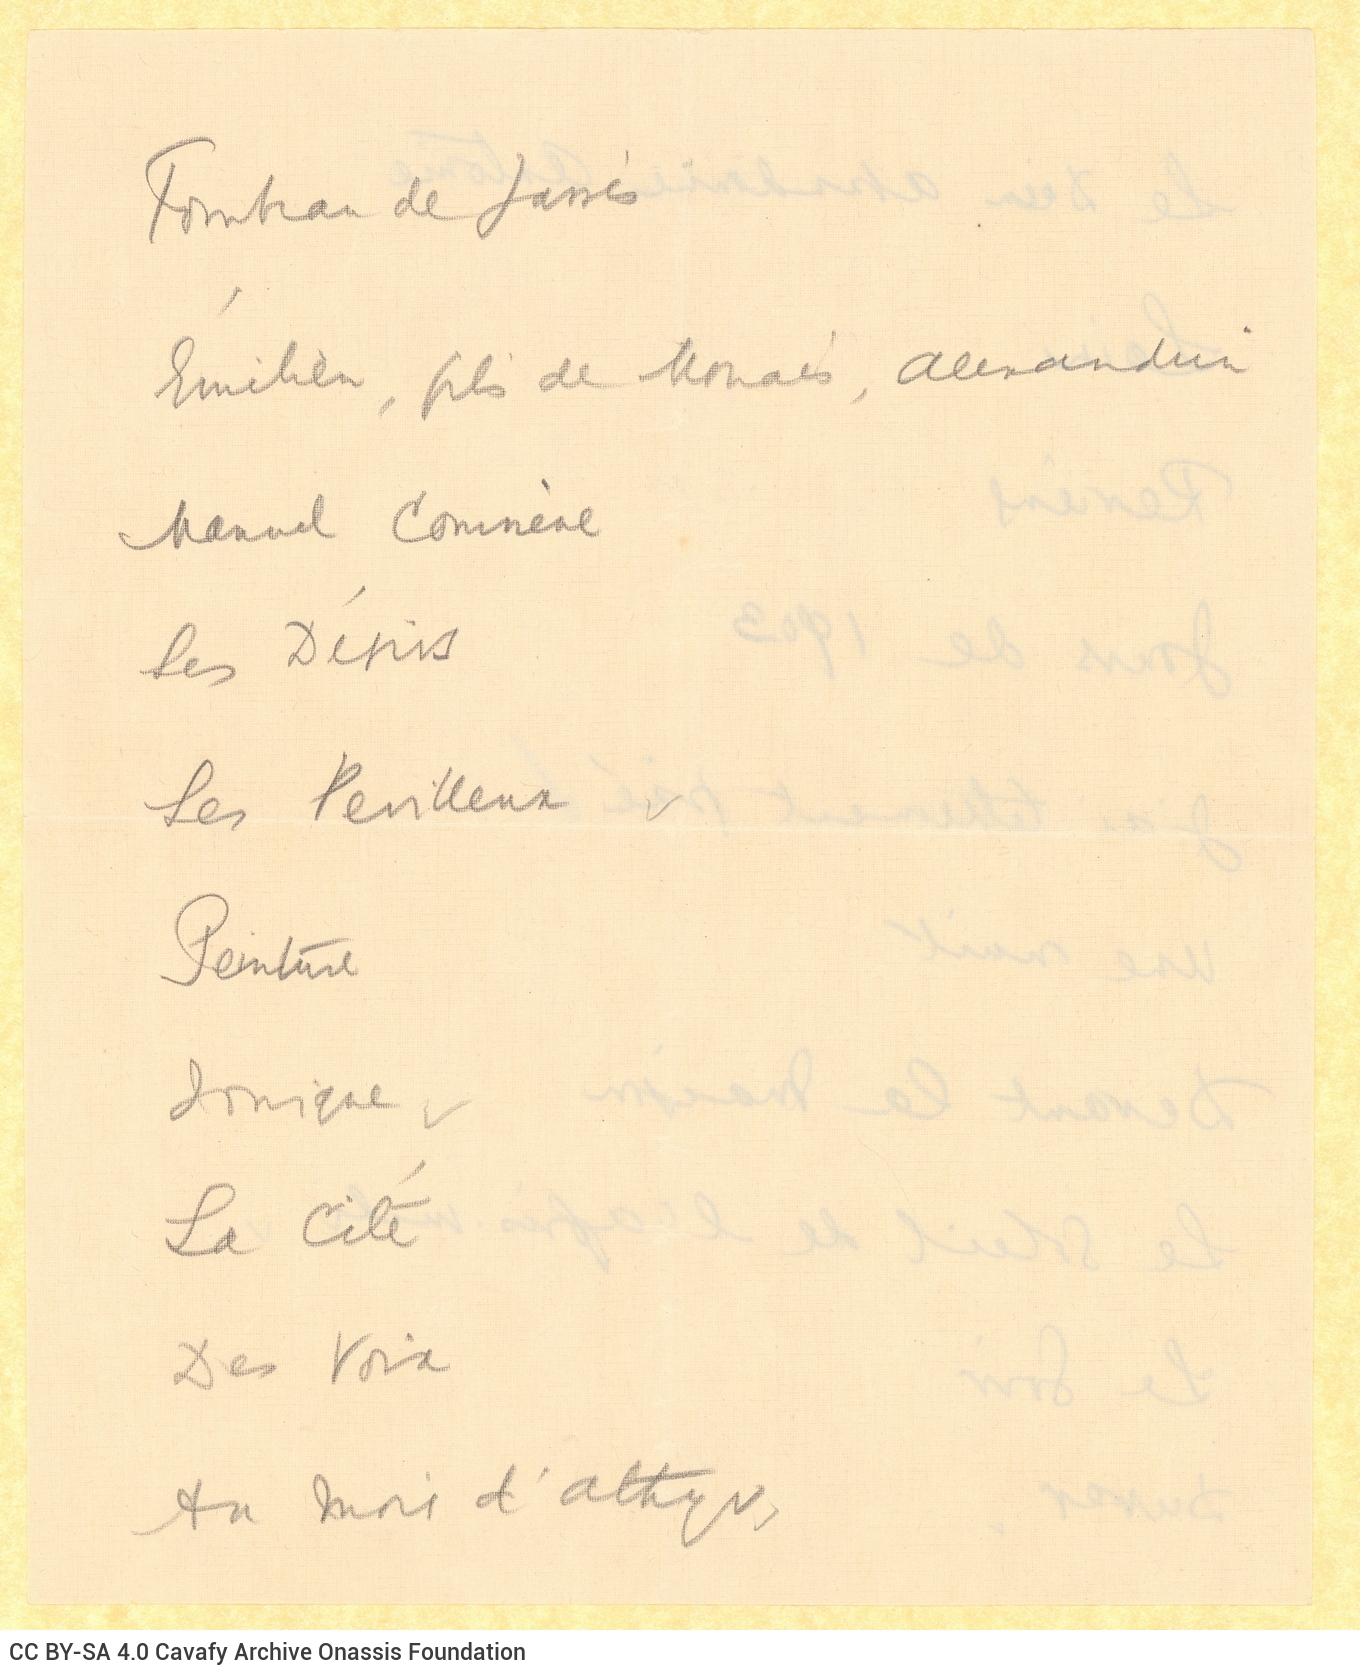 Handwritten list with poem titles on three sheets. Only one title is recorded in Greek ("But Wise Men Apprehend What Is Im